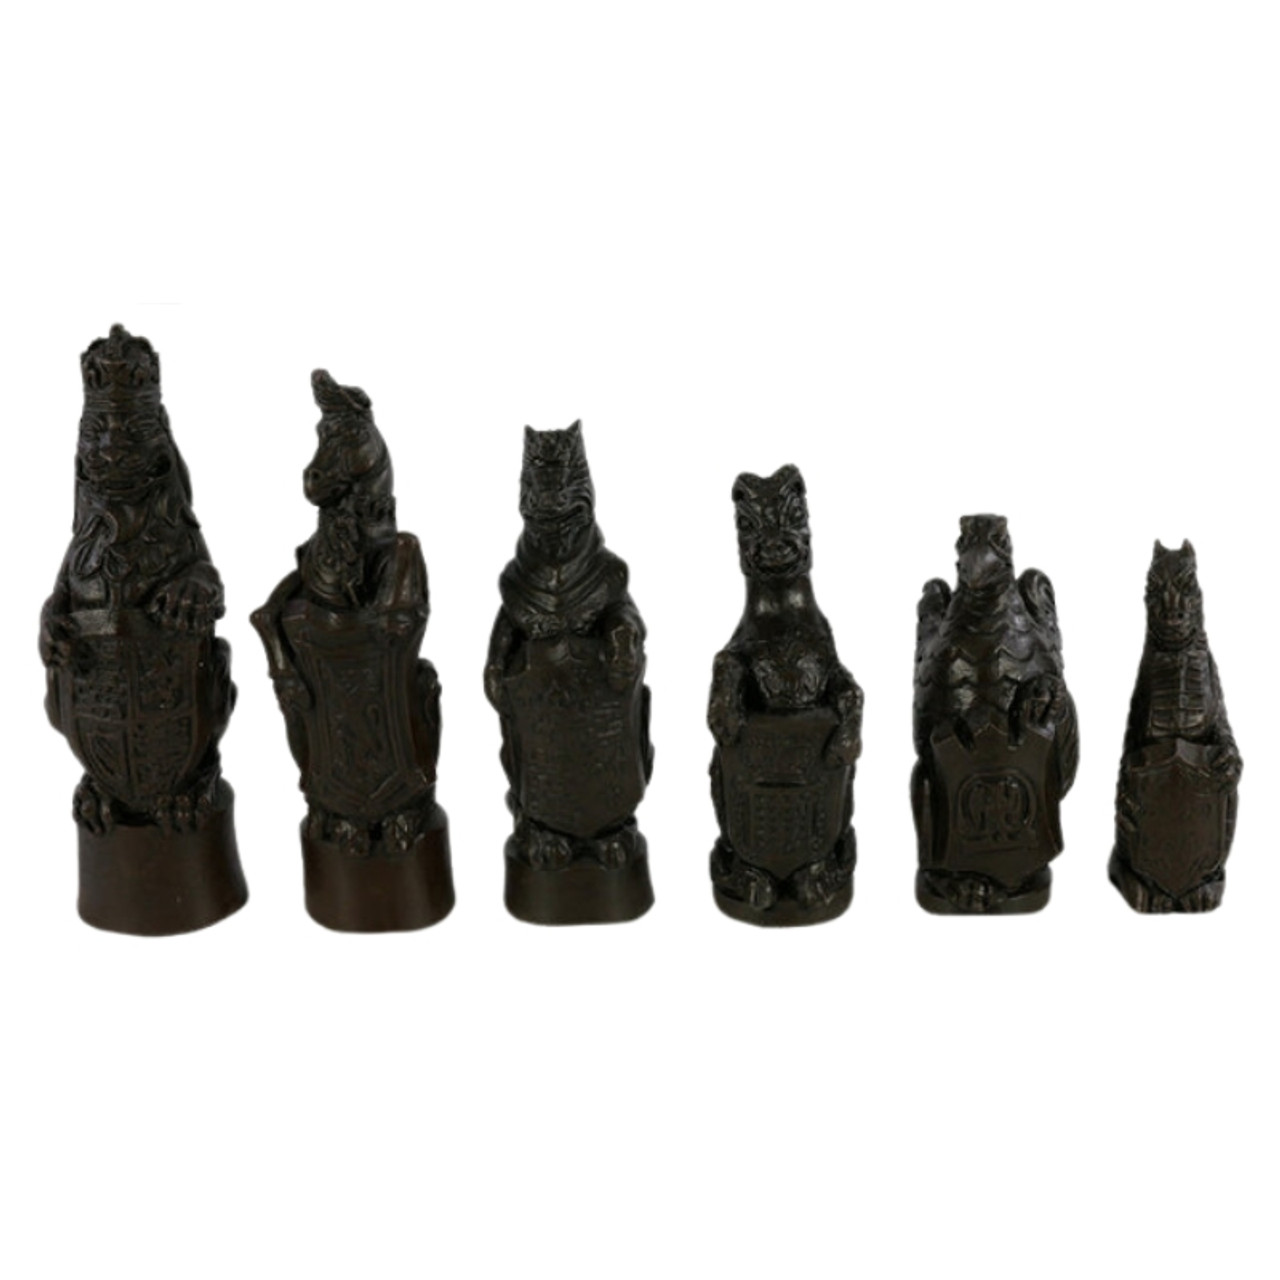 The Heraldic Chess Pieces - Stone Resin with 5.8" King black pieces